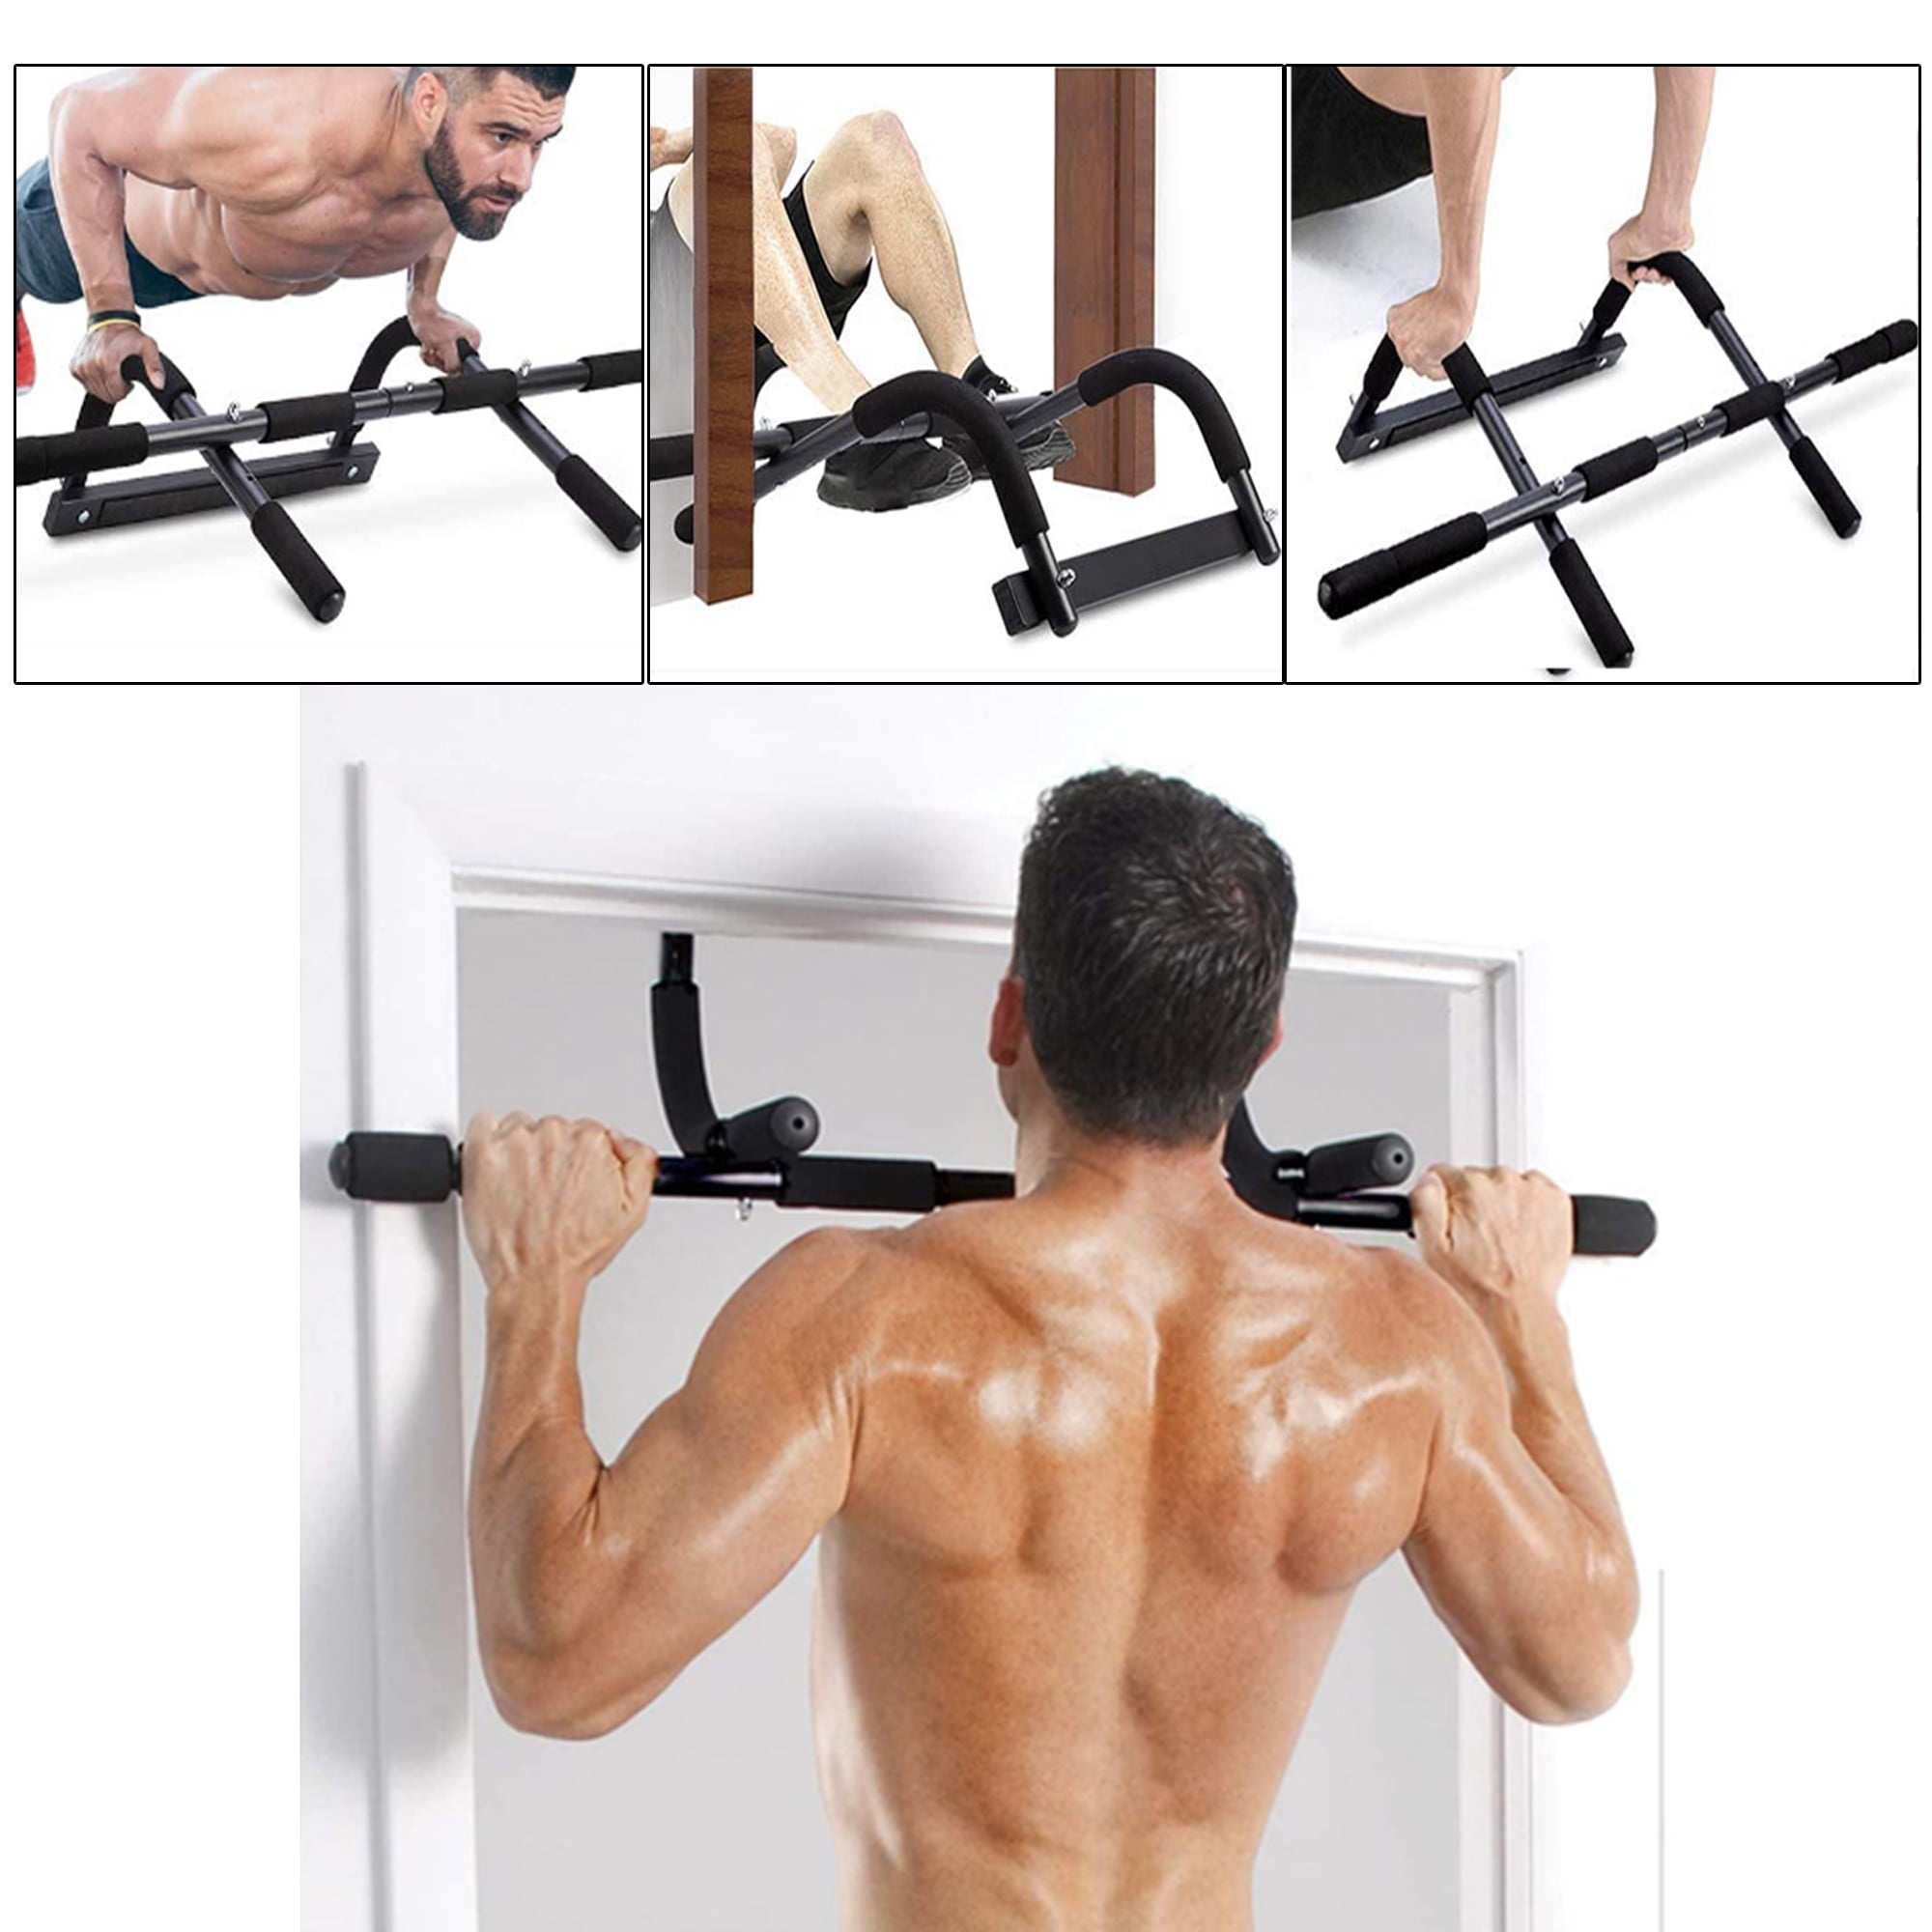 Multifunctional Door Pull-Up Machine Push-Up Tool Pull-up Bar Pull-up Bar 